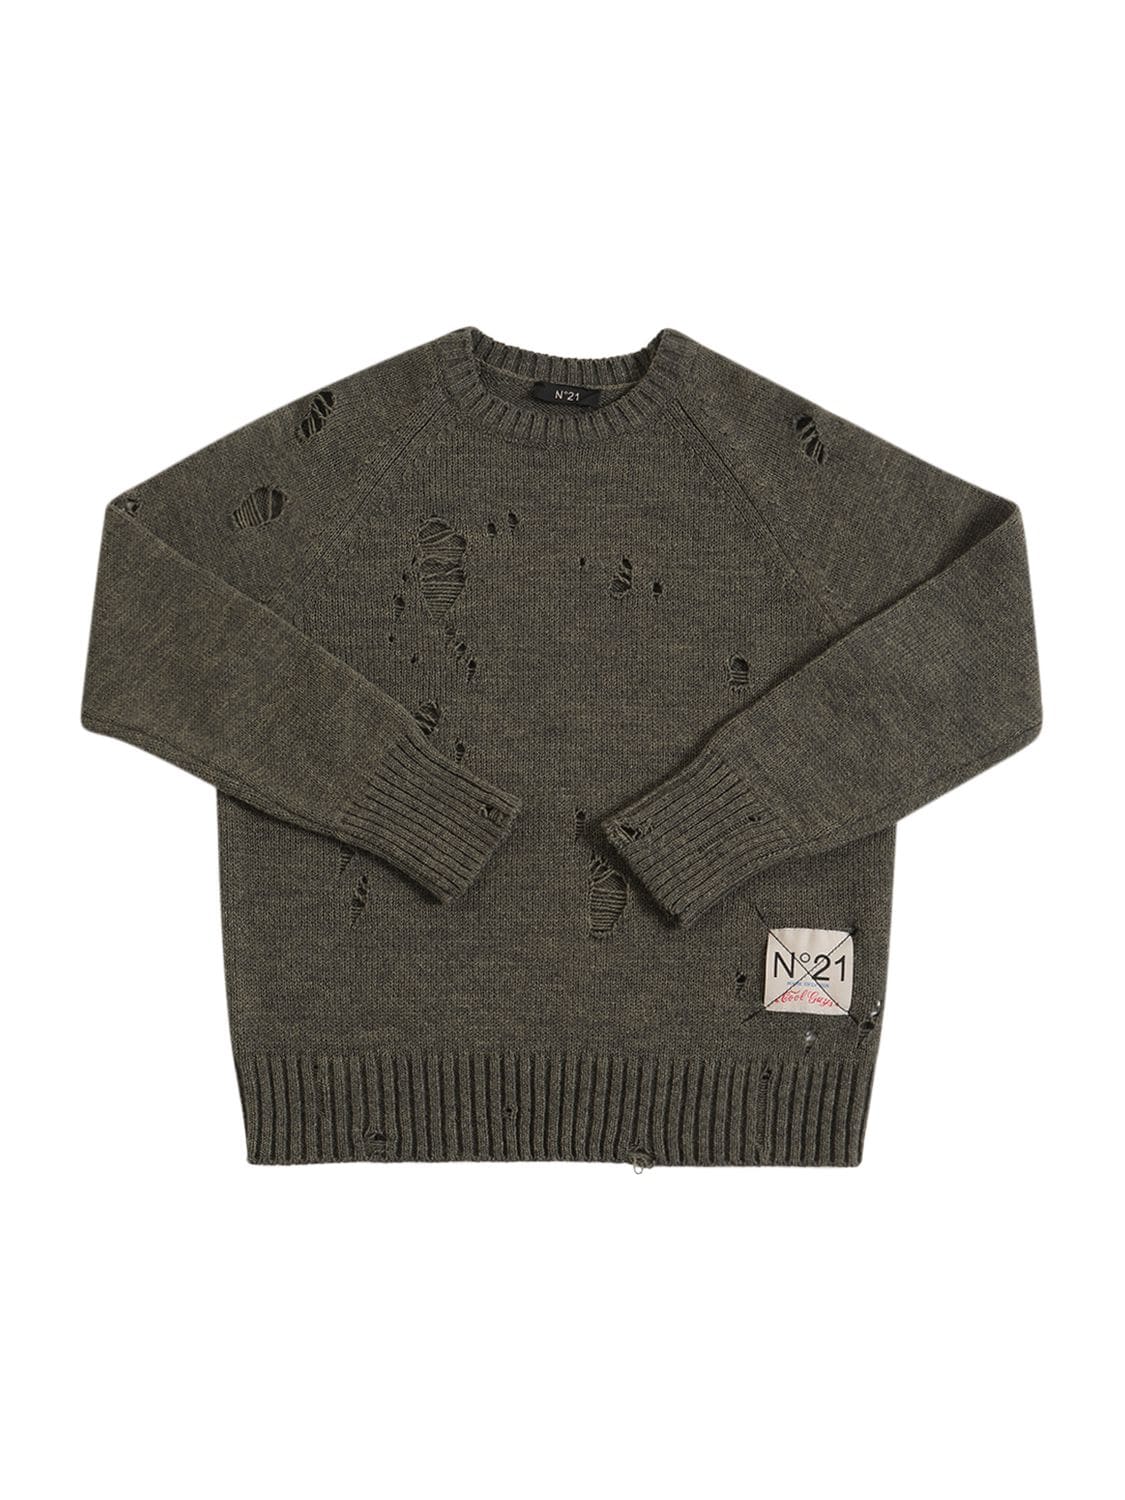 Image of Distressed Wool Blend Knit Sweater